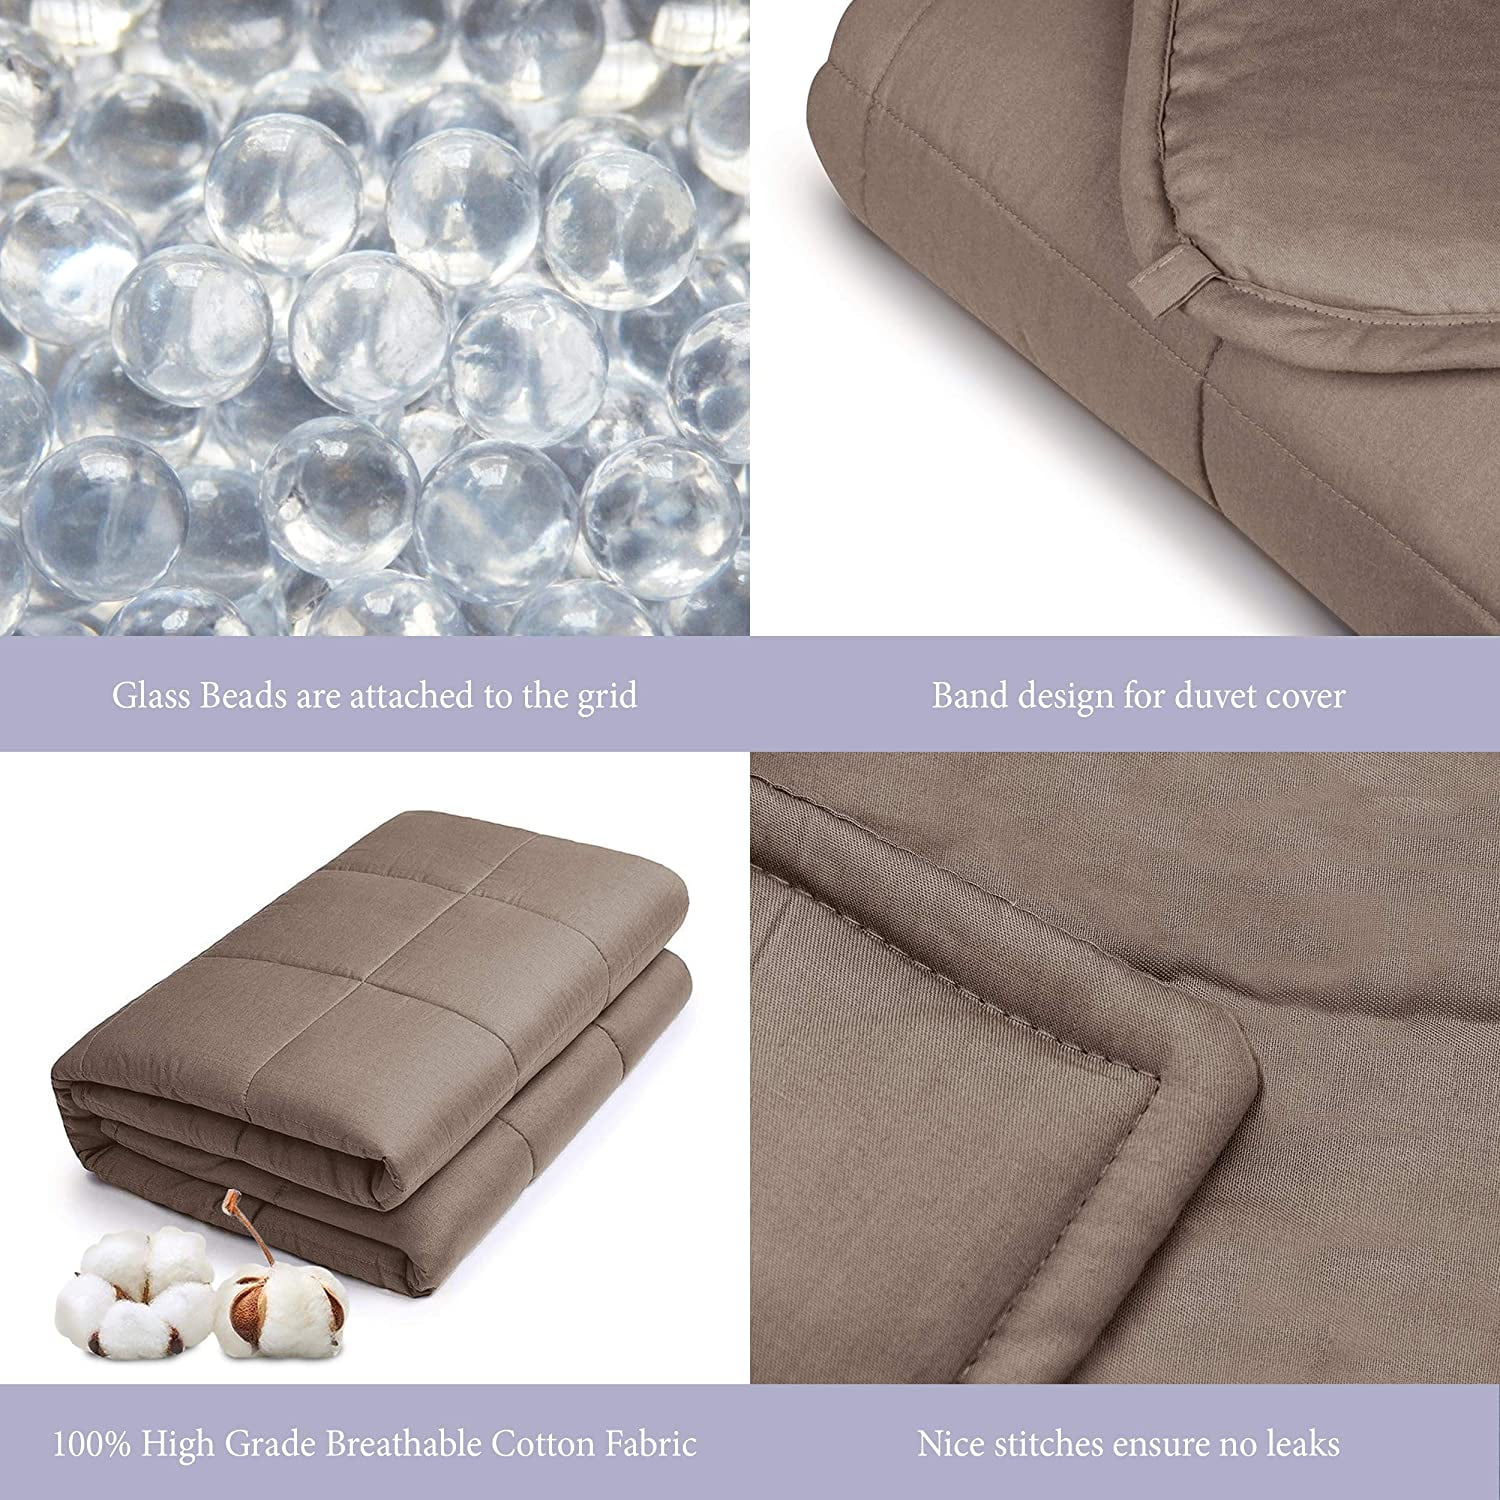 15lb, 48x78, Twin//Full Size Comfort 100/% Calming Cotton Blanket with Glass Beads Royal Therapy Weighted Blanket Adult /& Kids Bed